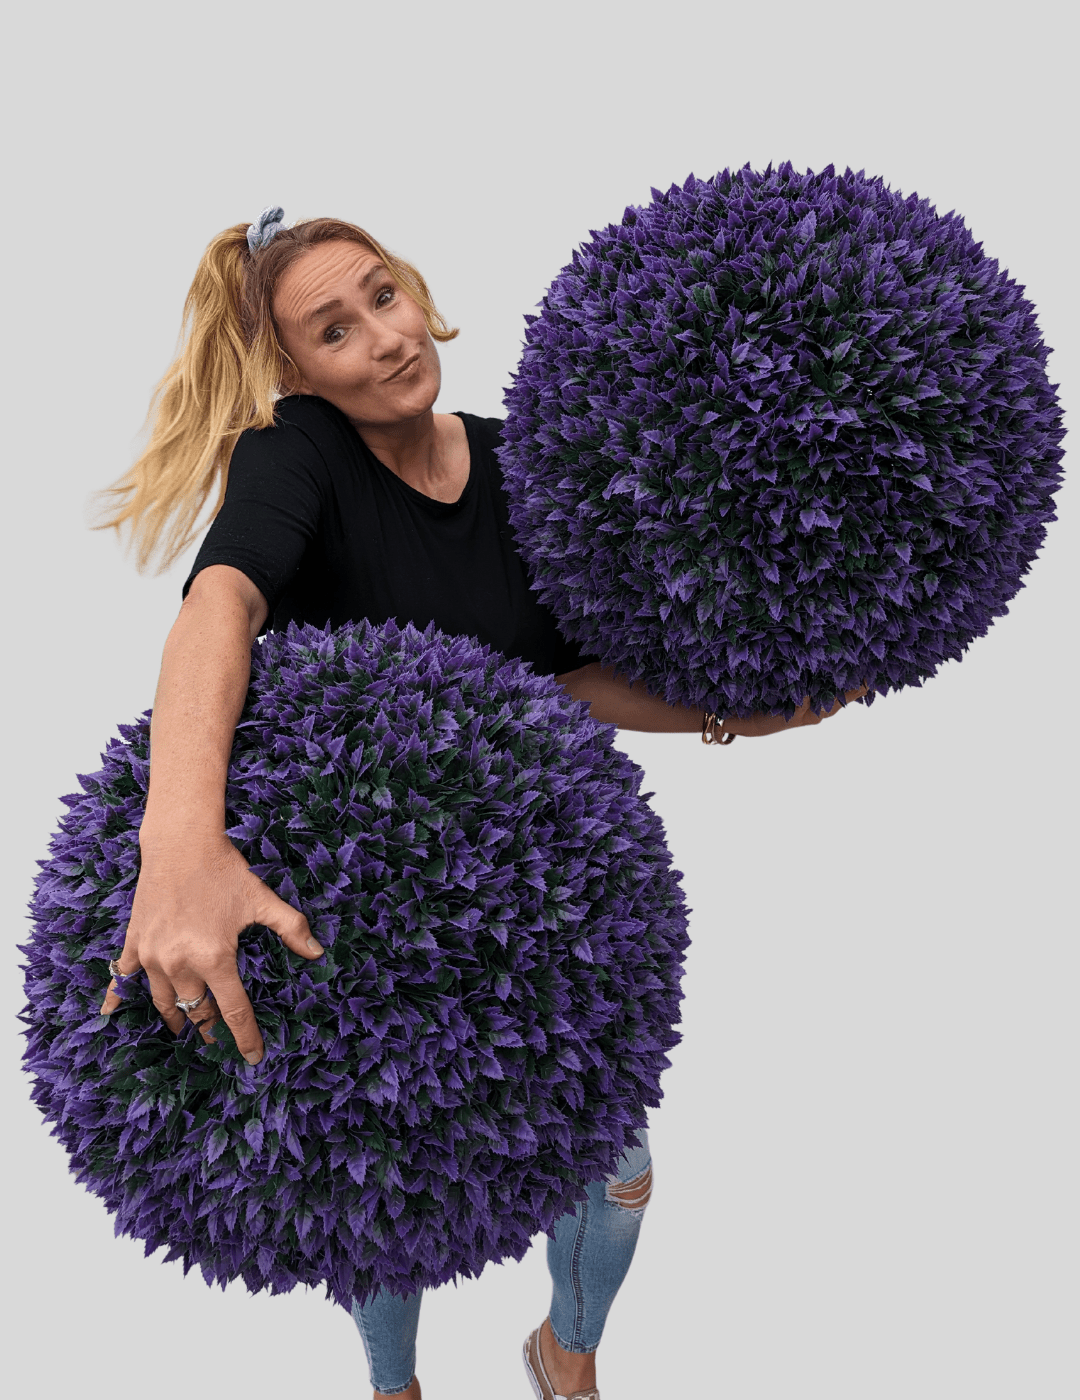 365 Curb Appeal Topiary ball 2 topiary balls (4 halves) 23" XL Jagged Purple Leaf Topiary Ball